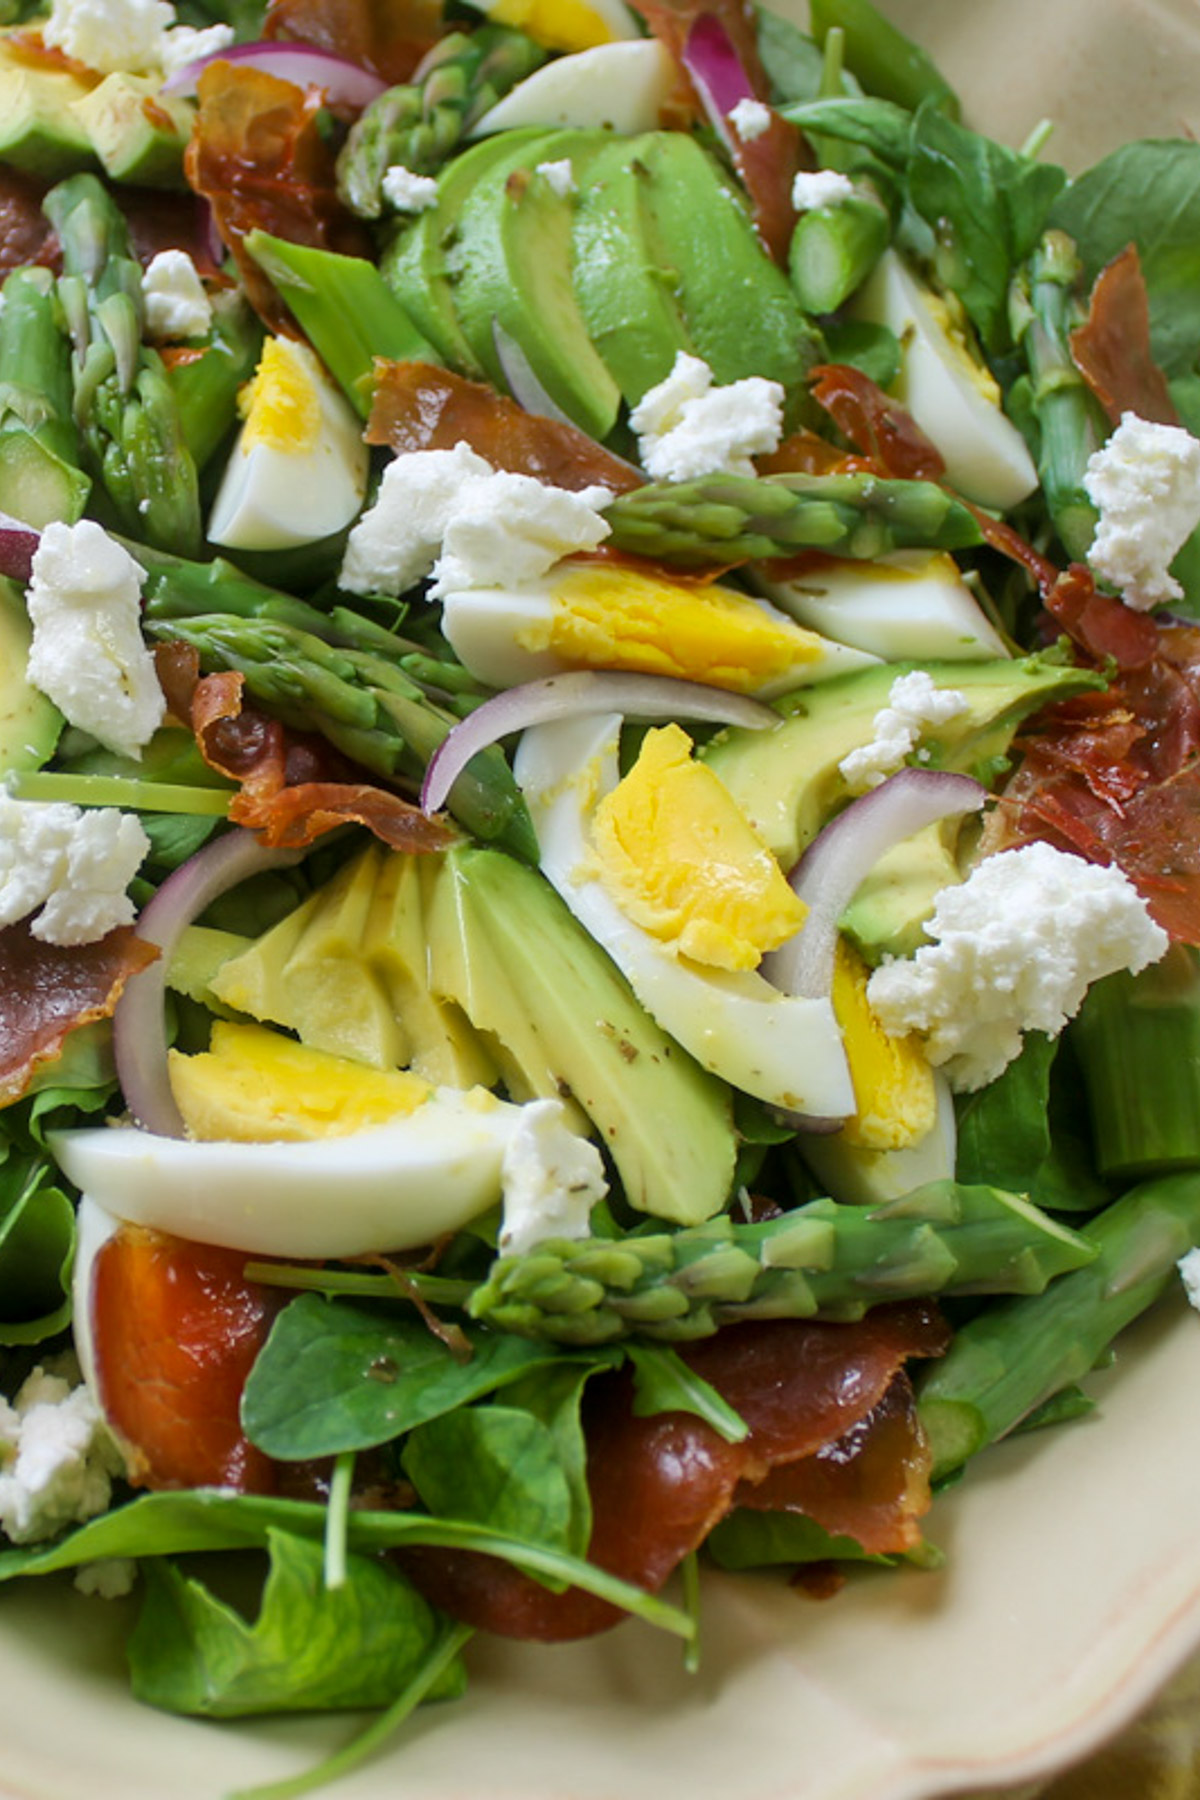 A close up of asparagus salad with sliced avocado, crumbled crispy prosciutto and hard boiled egg slices.